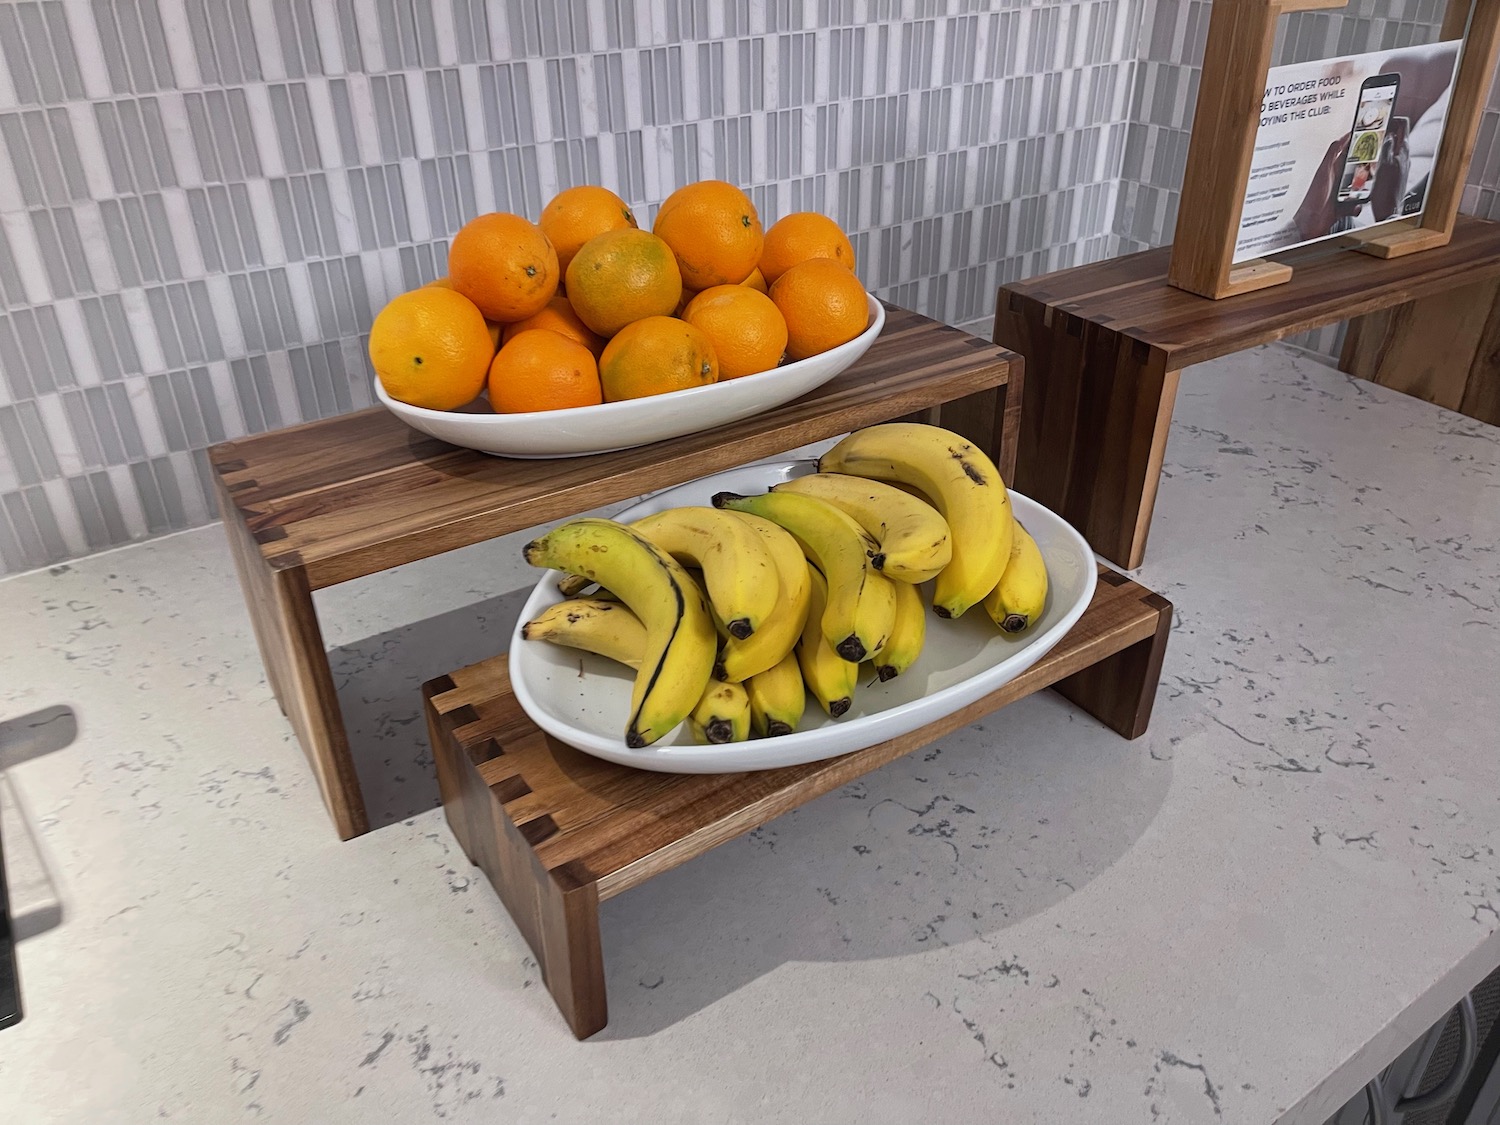 a bowl of bananas and oranges on a wooden shelf